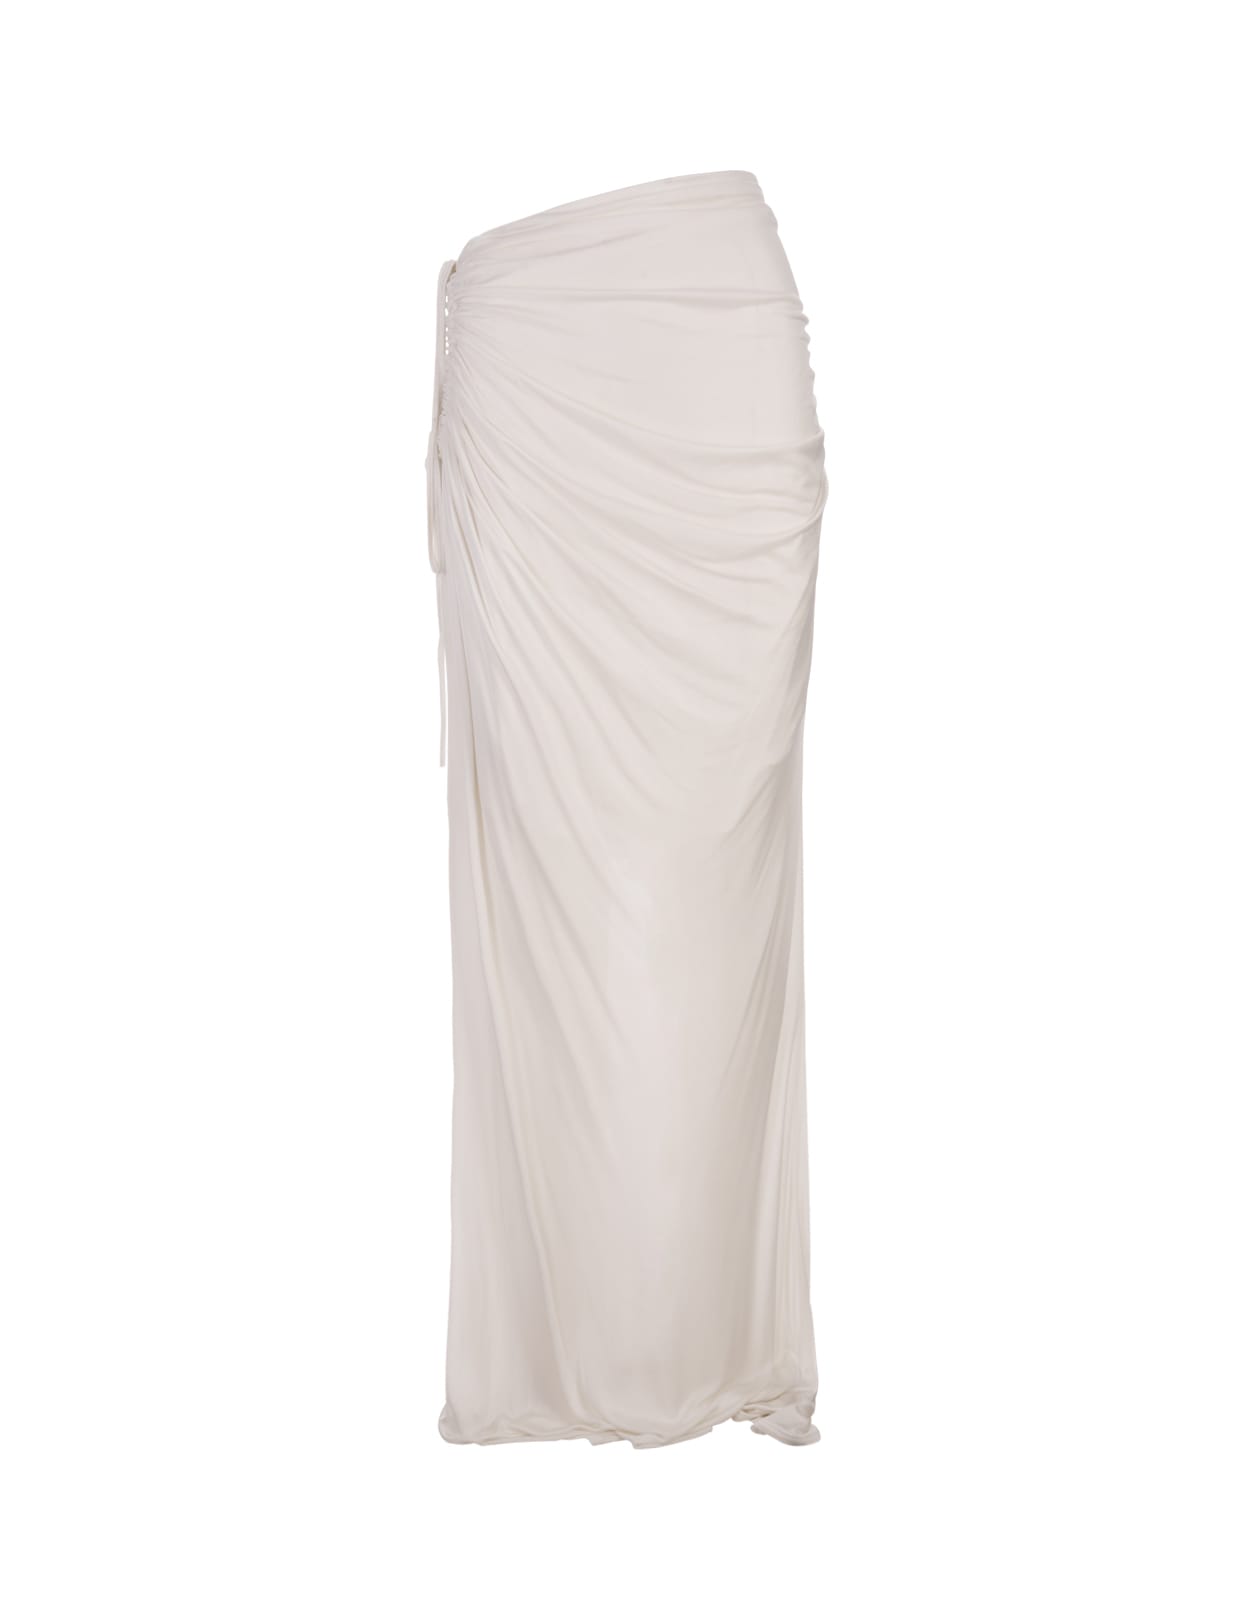 ANDREÄDAMO IVORY LONG SKIRT WITH CUT-OUT